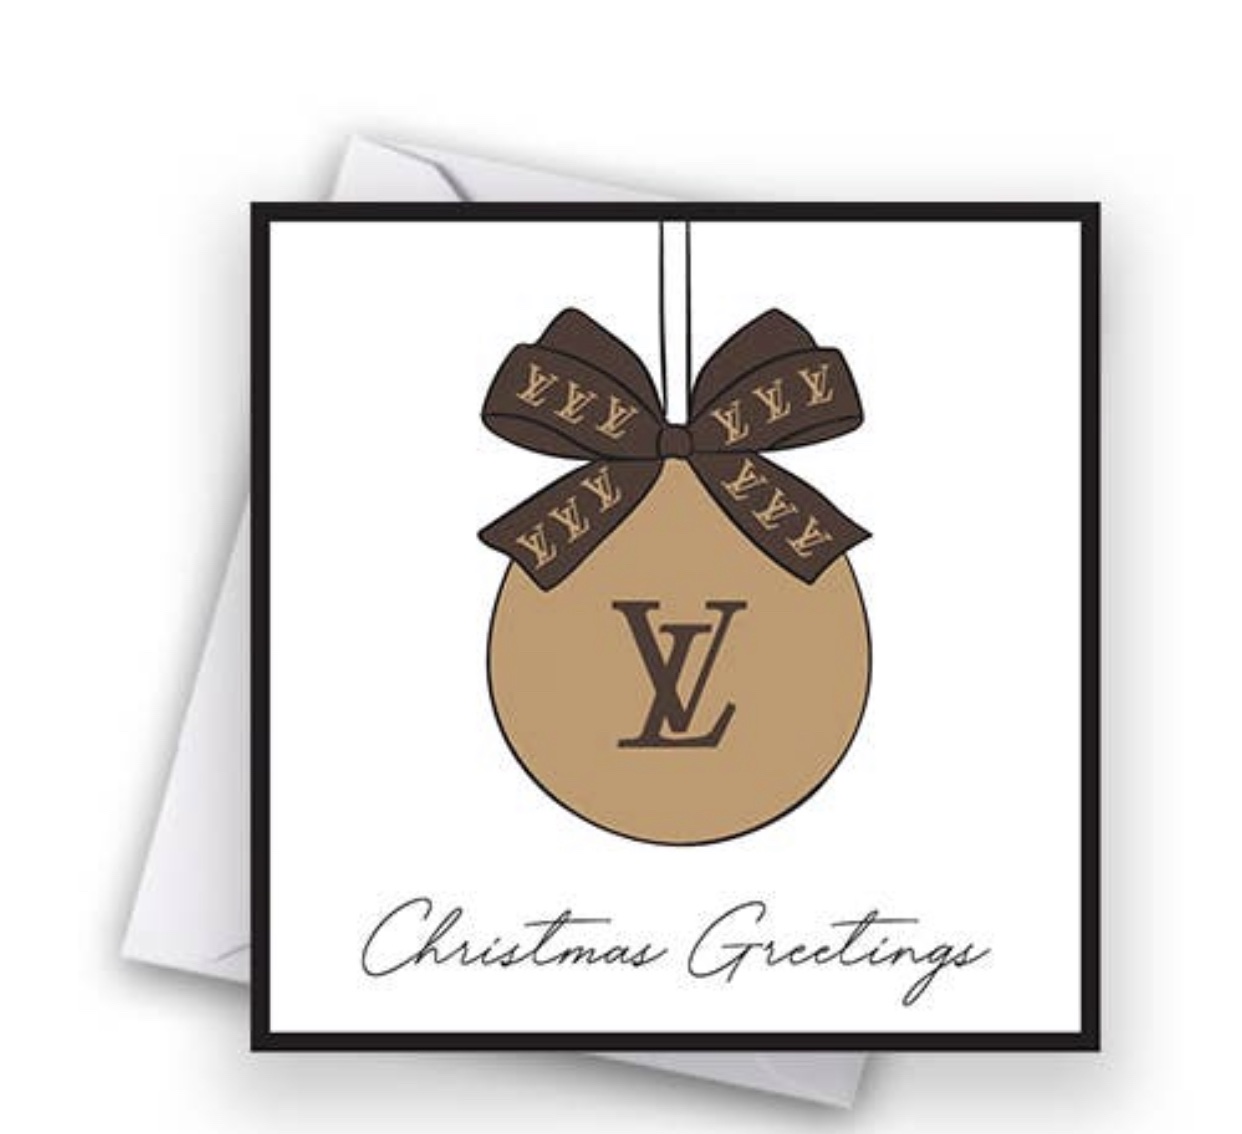 Louis Vuitton Christmas Greeting Cards & Invitations